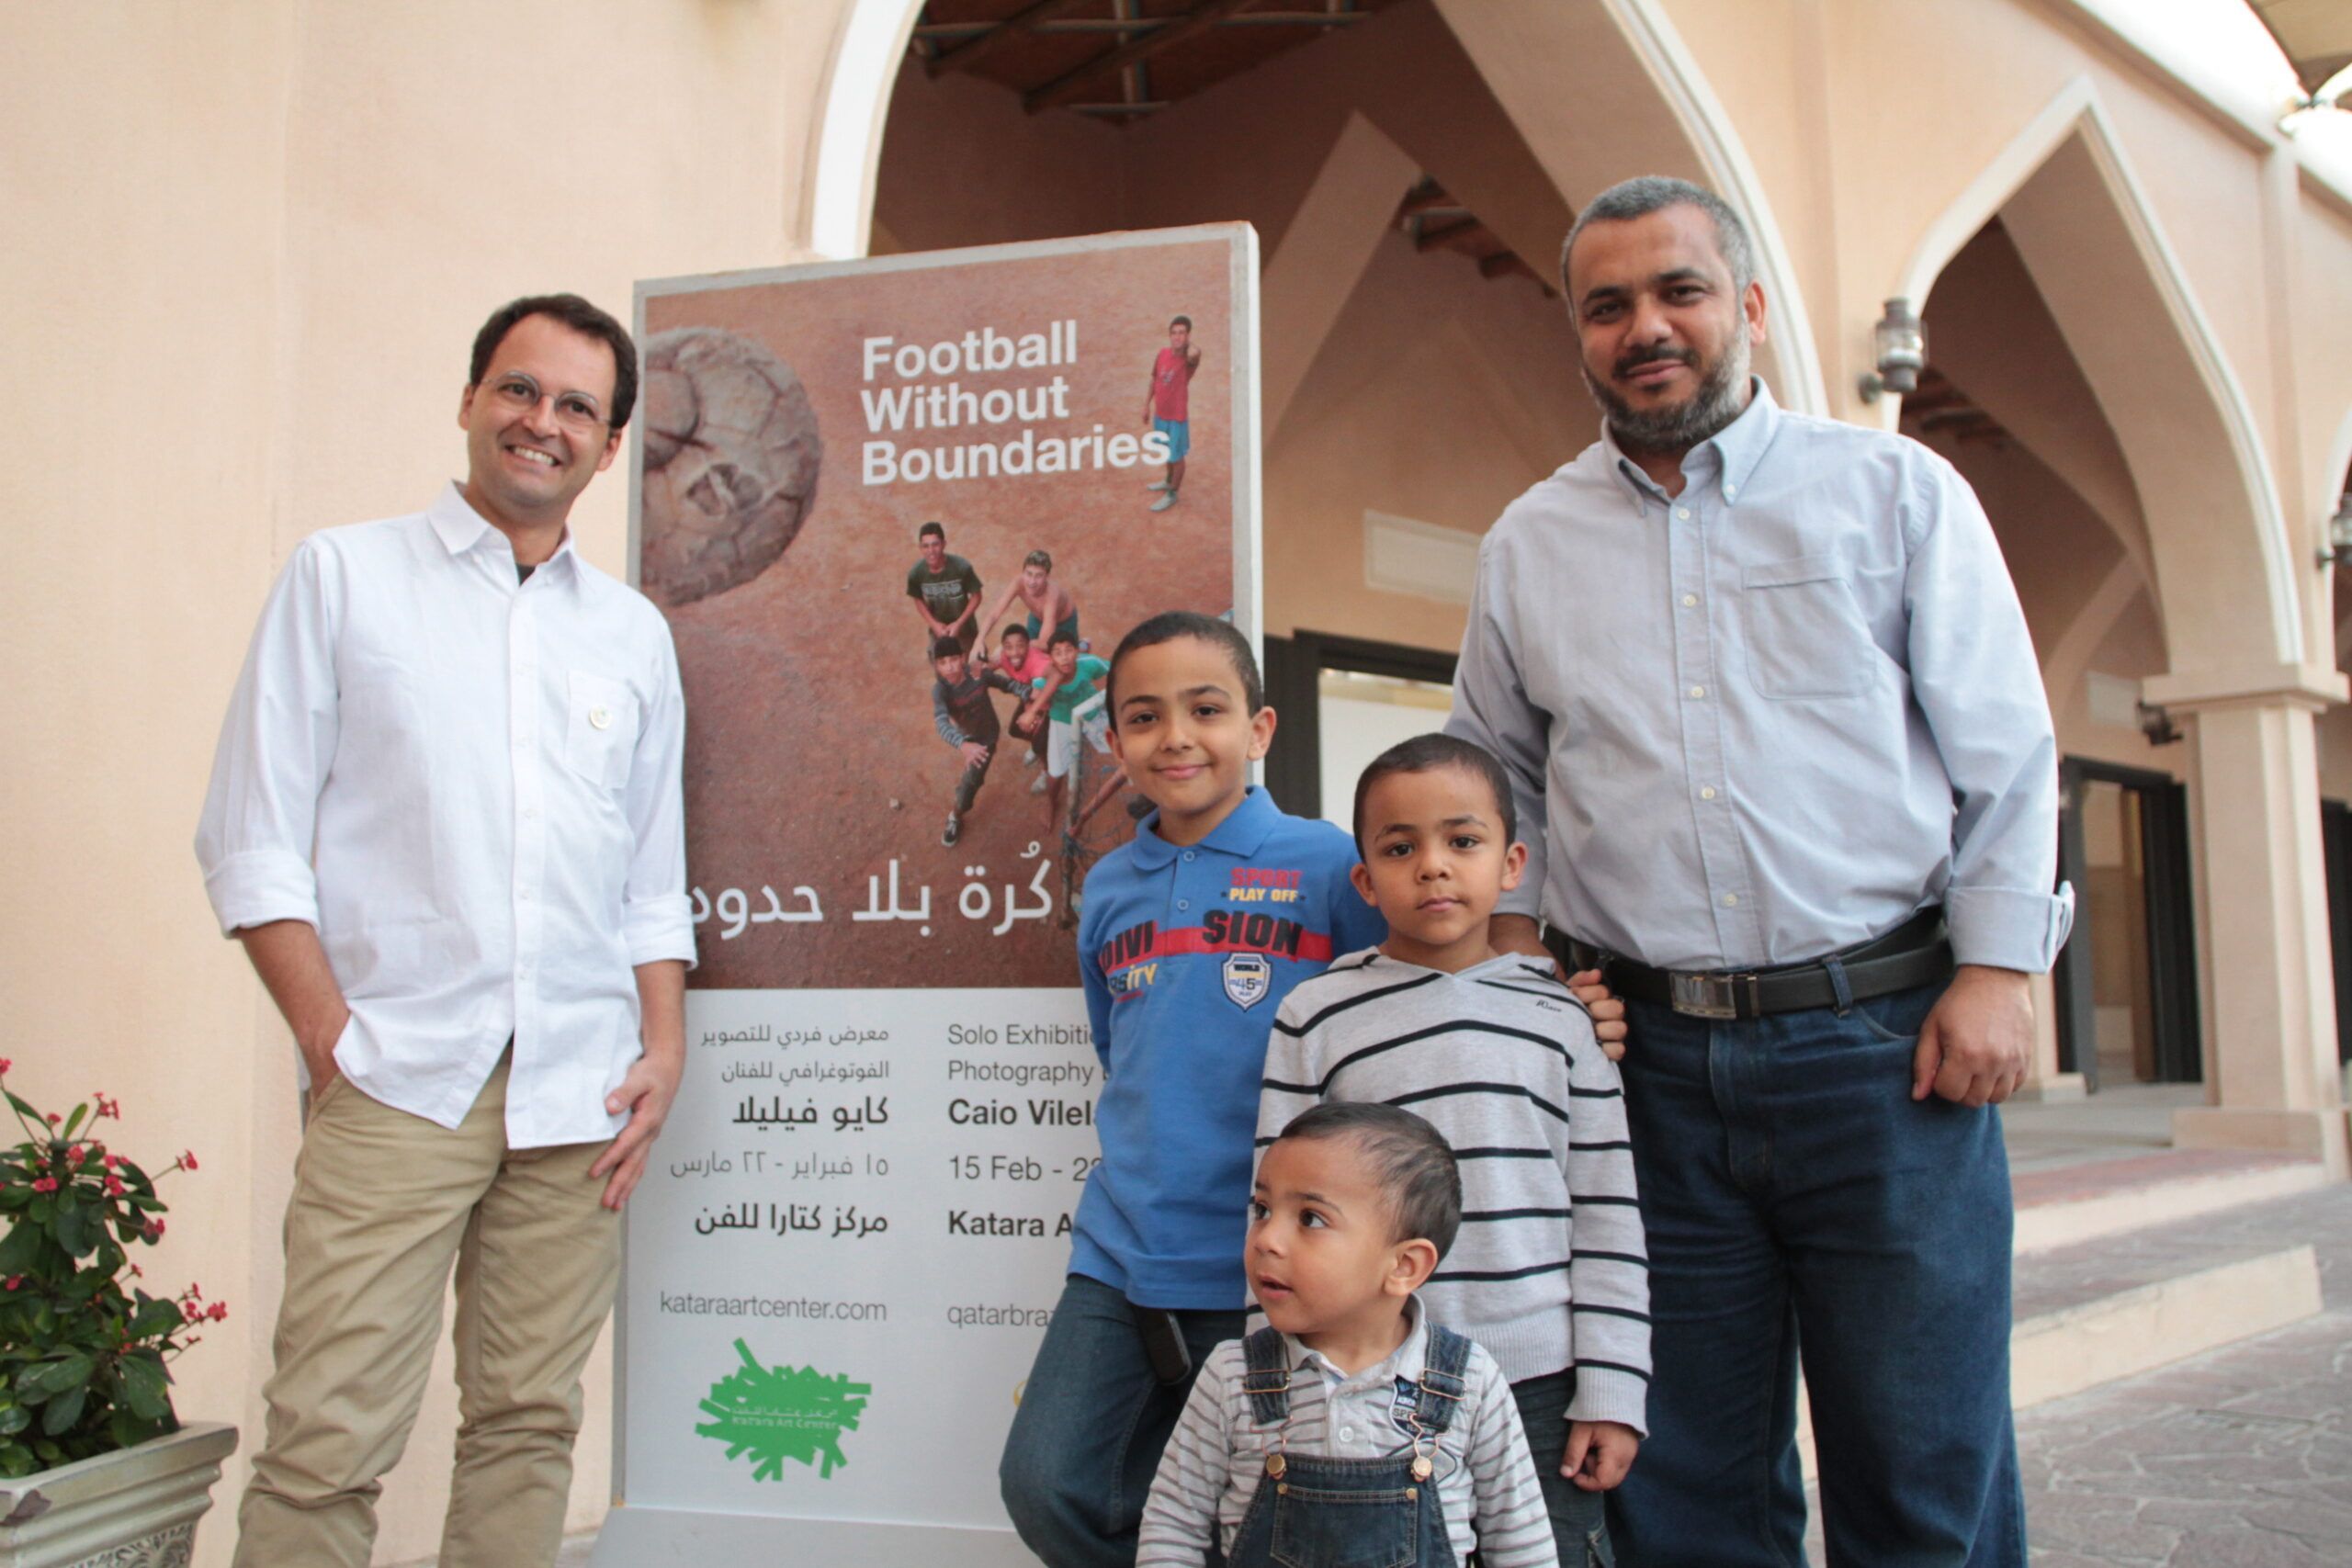 Two men stand with three young boys in front of an information panel at the Football without boundaries exhibition at Katara.